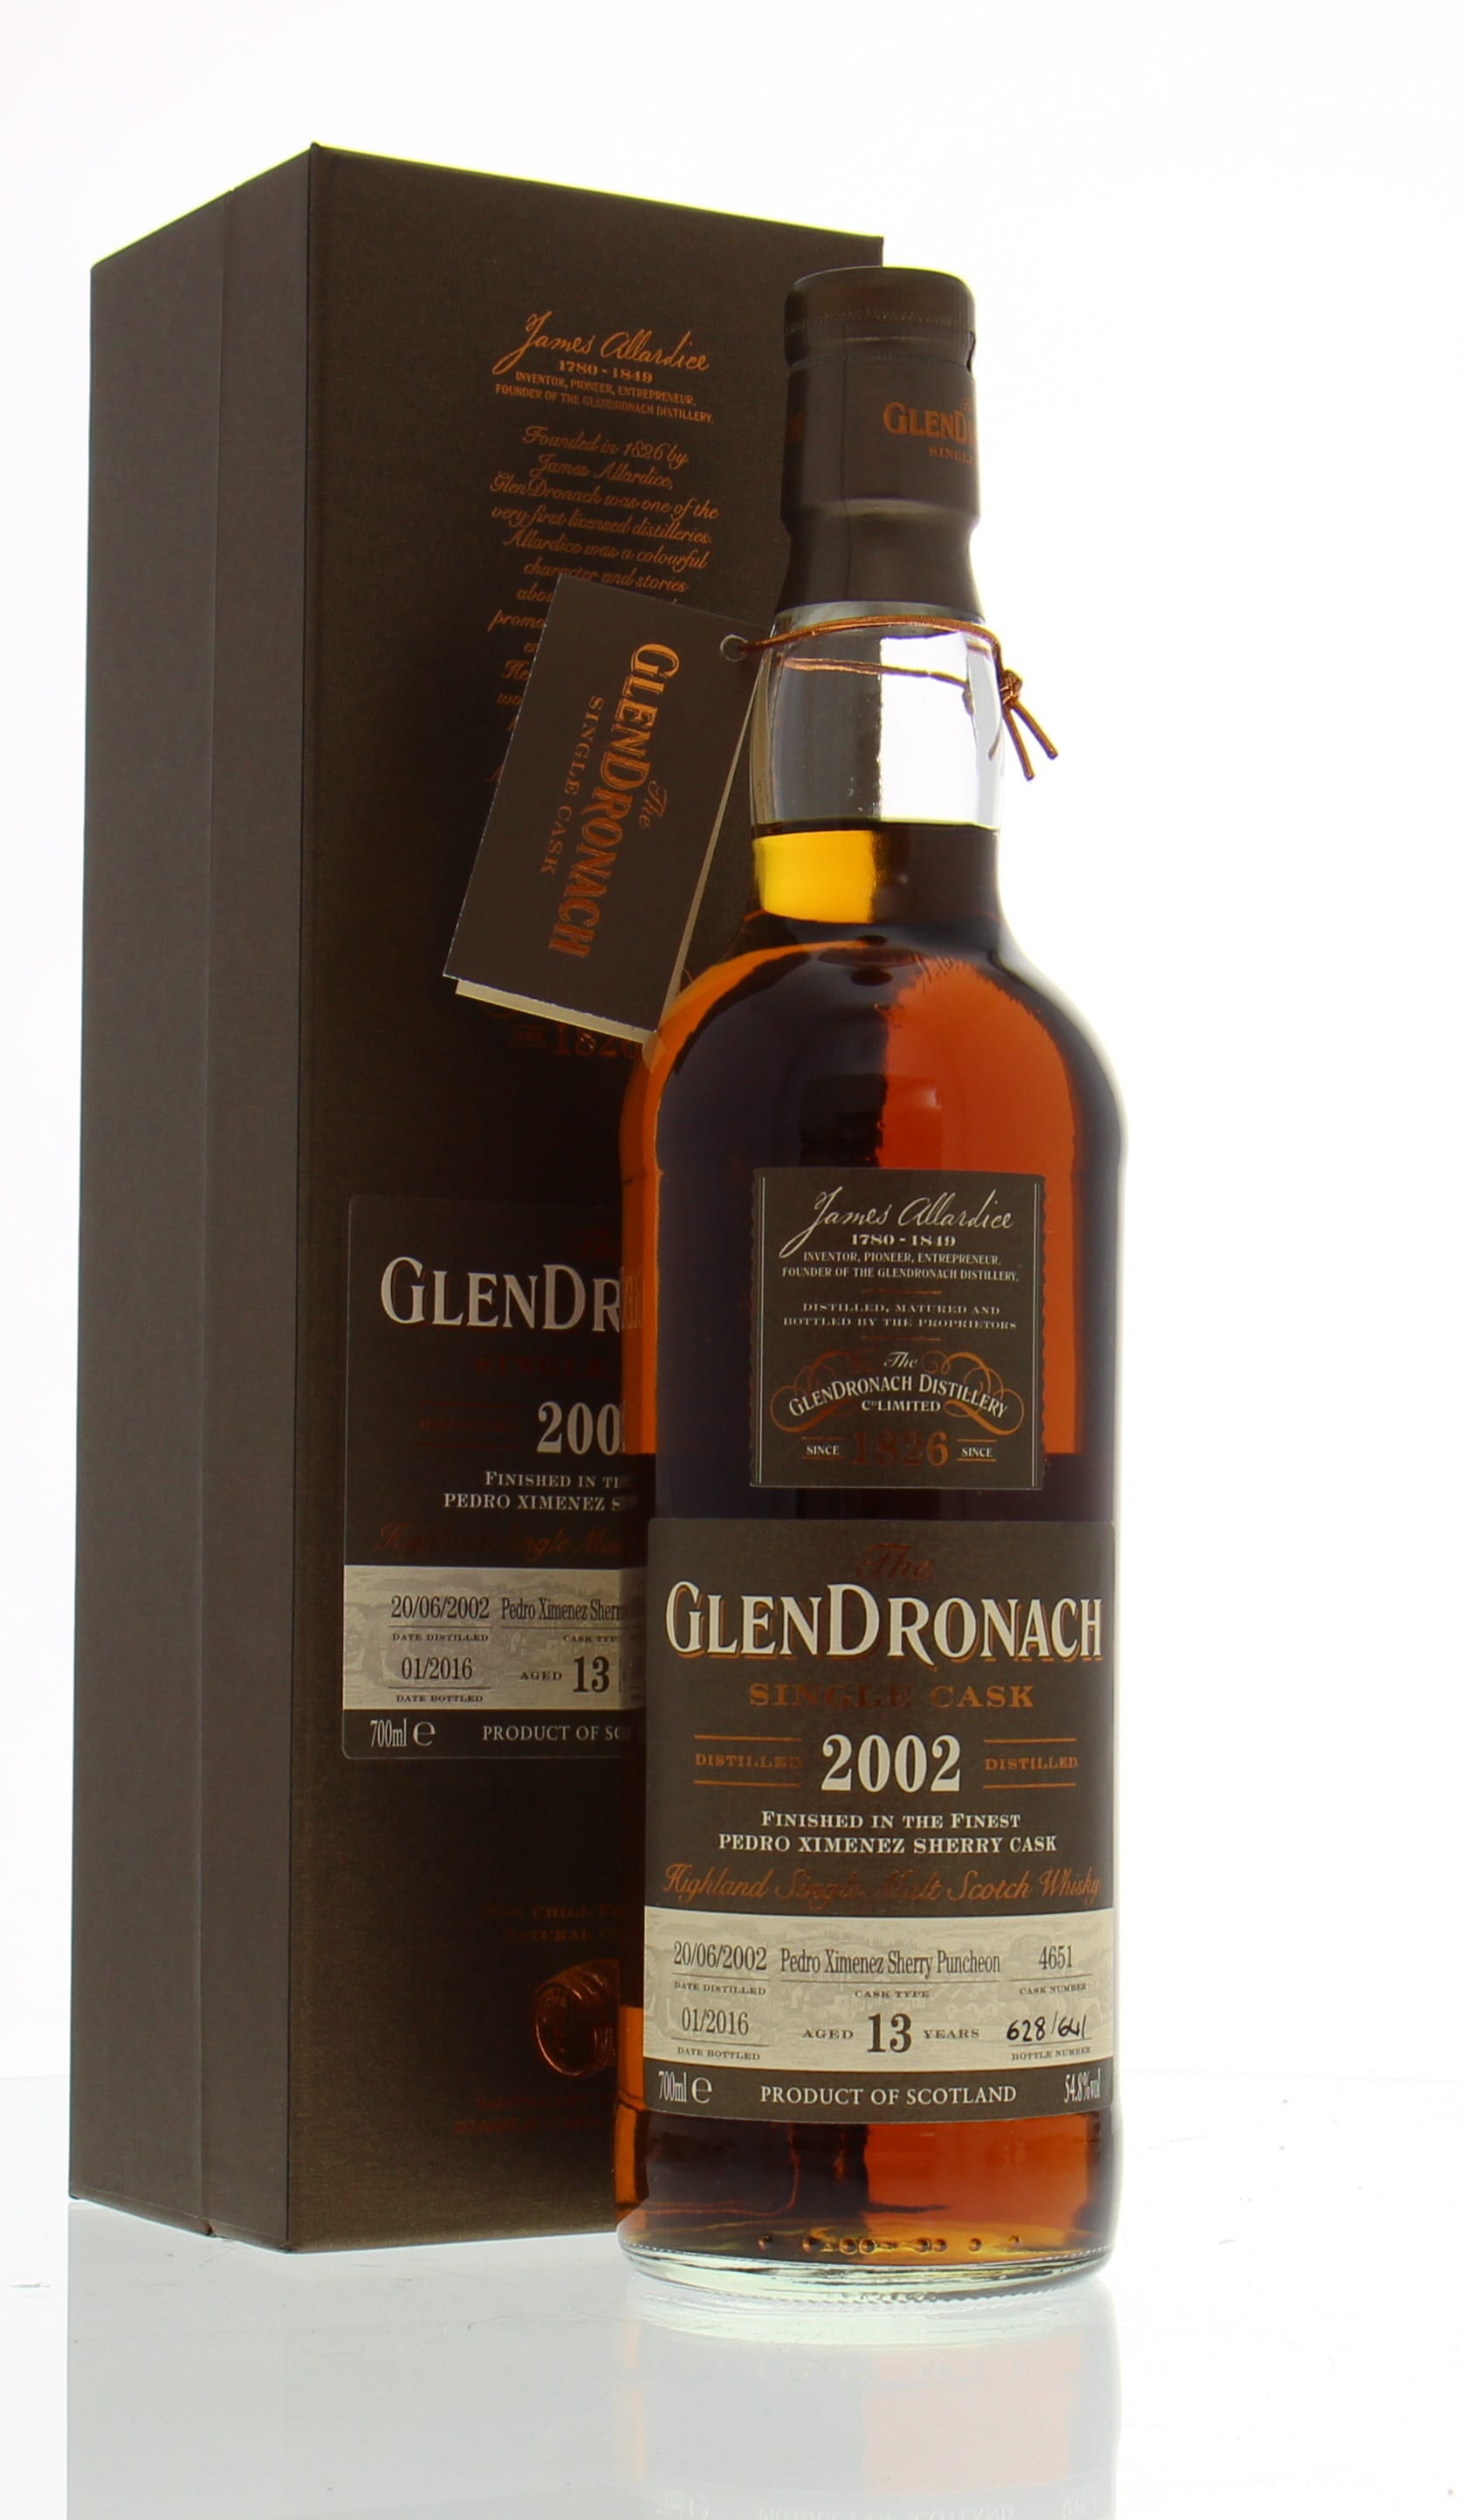 Glendronach - 14 Years Old Batch 13 Cask:4651 54.8% 2002 In Original Container